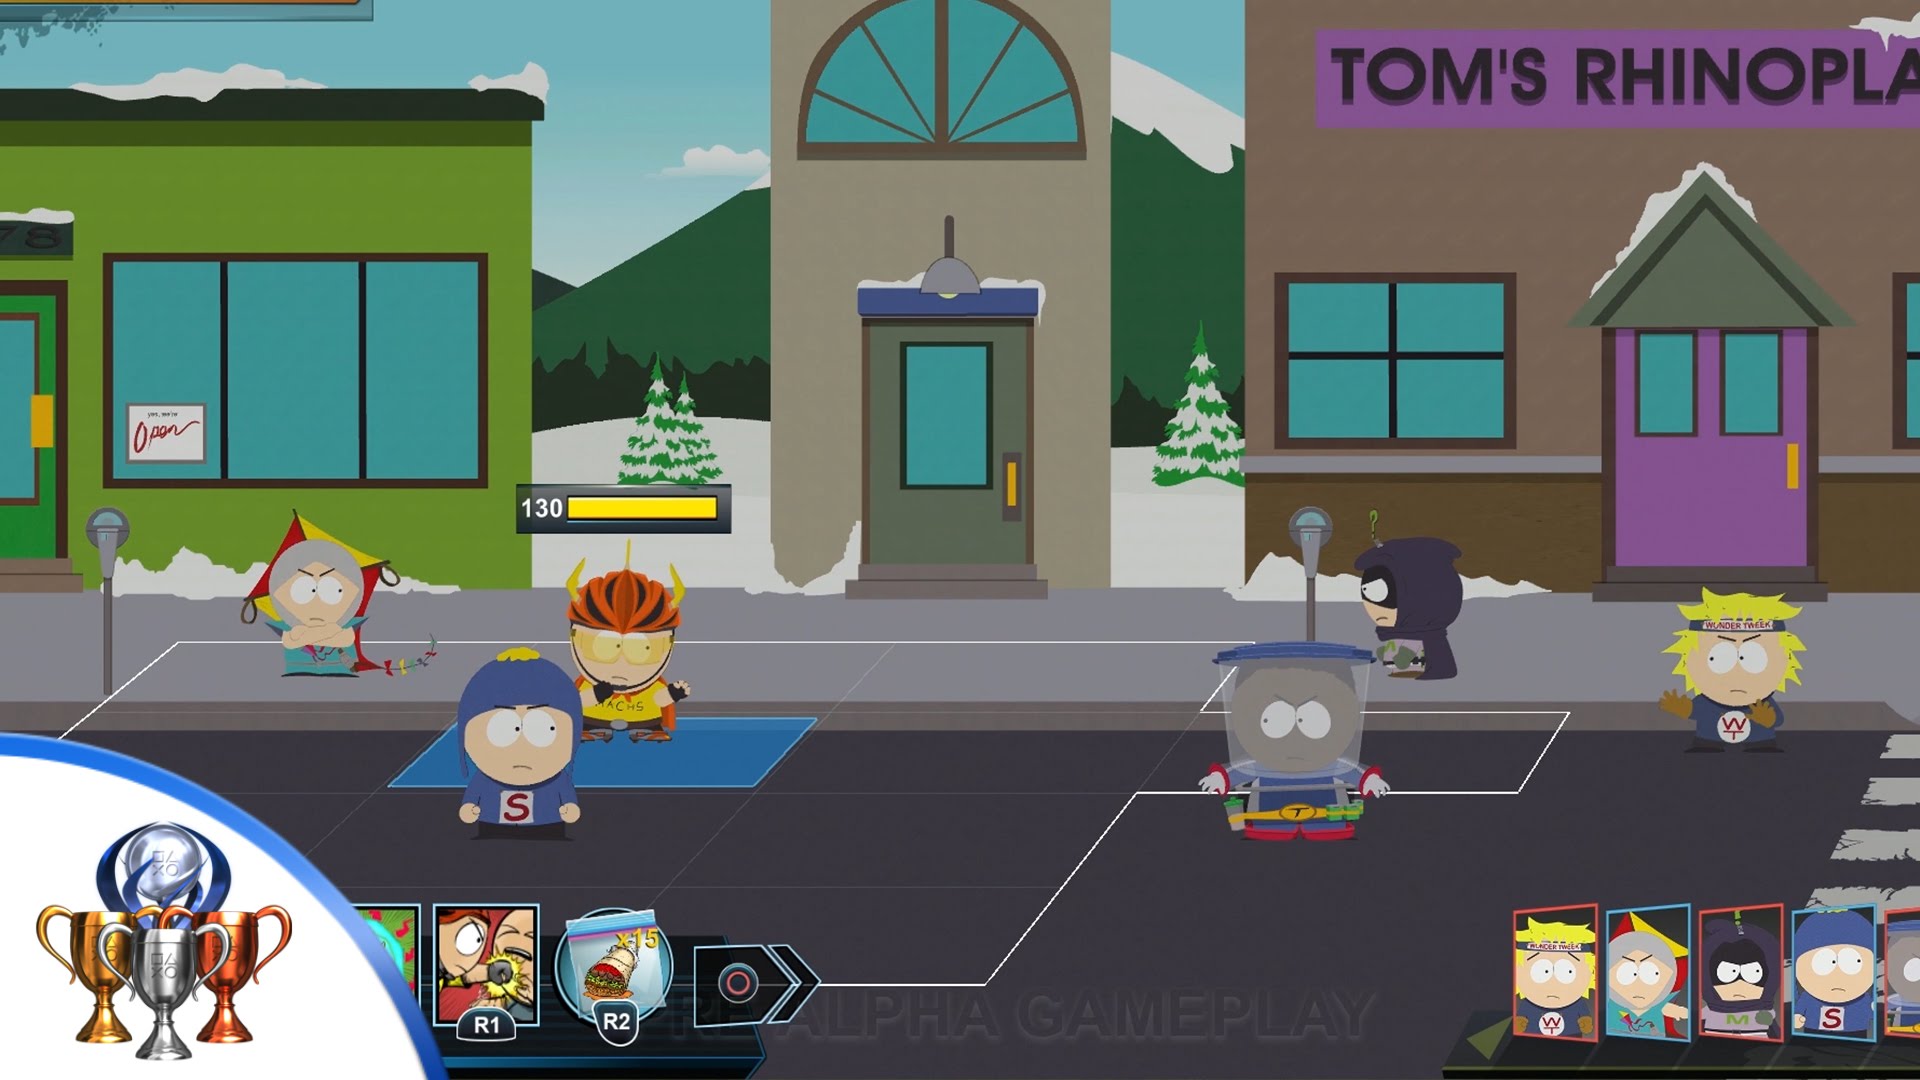 south park fractured but whole free copy of stick of truth